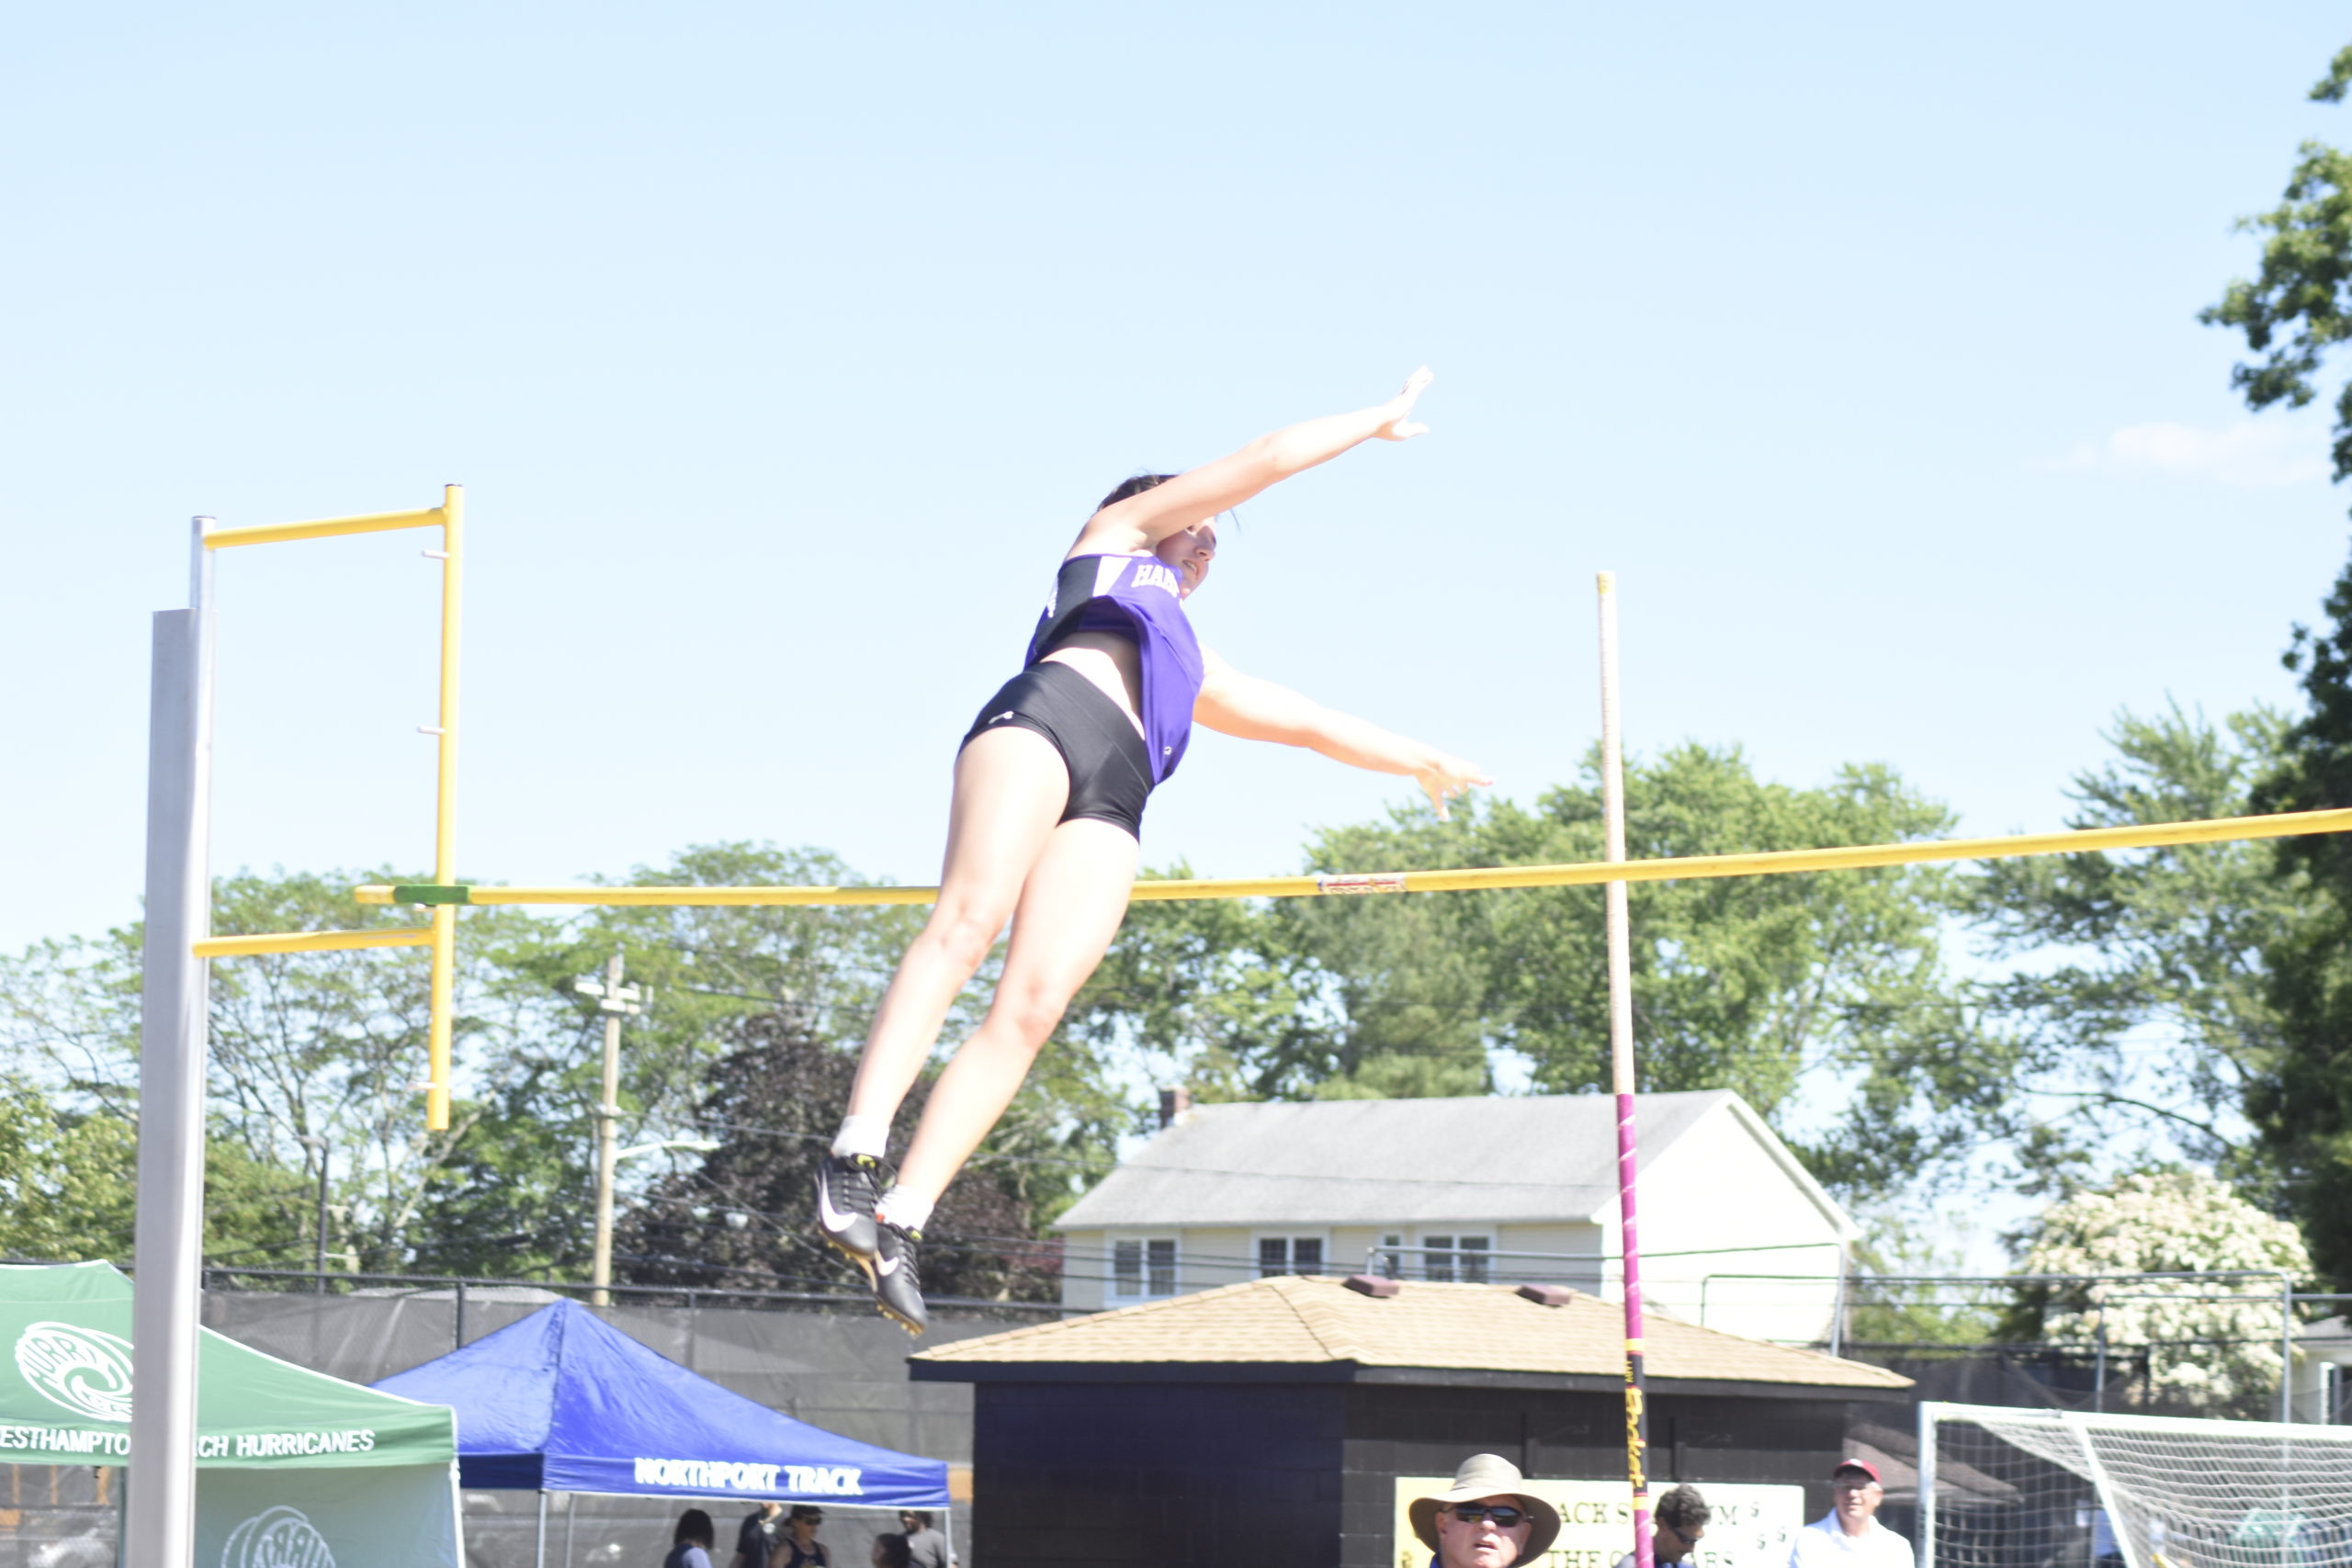 Hampton Bays sophomore Maizie Poulakis tied for sixth place in the pole vault at the Section XI girls track championships.